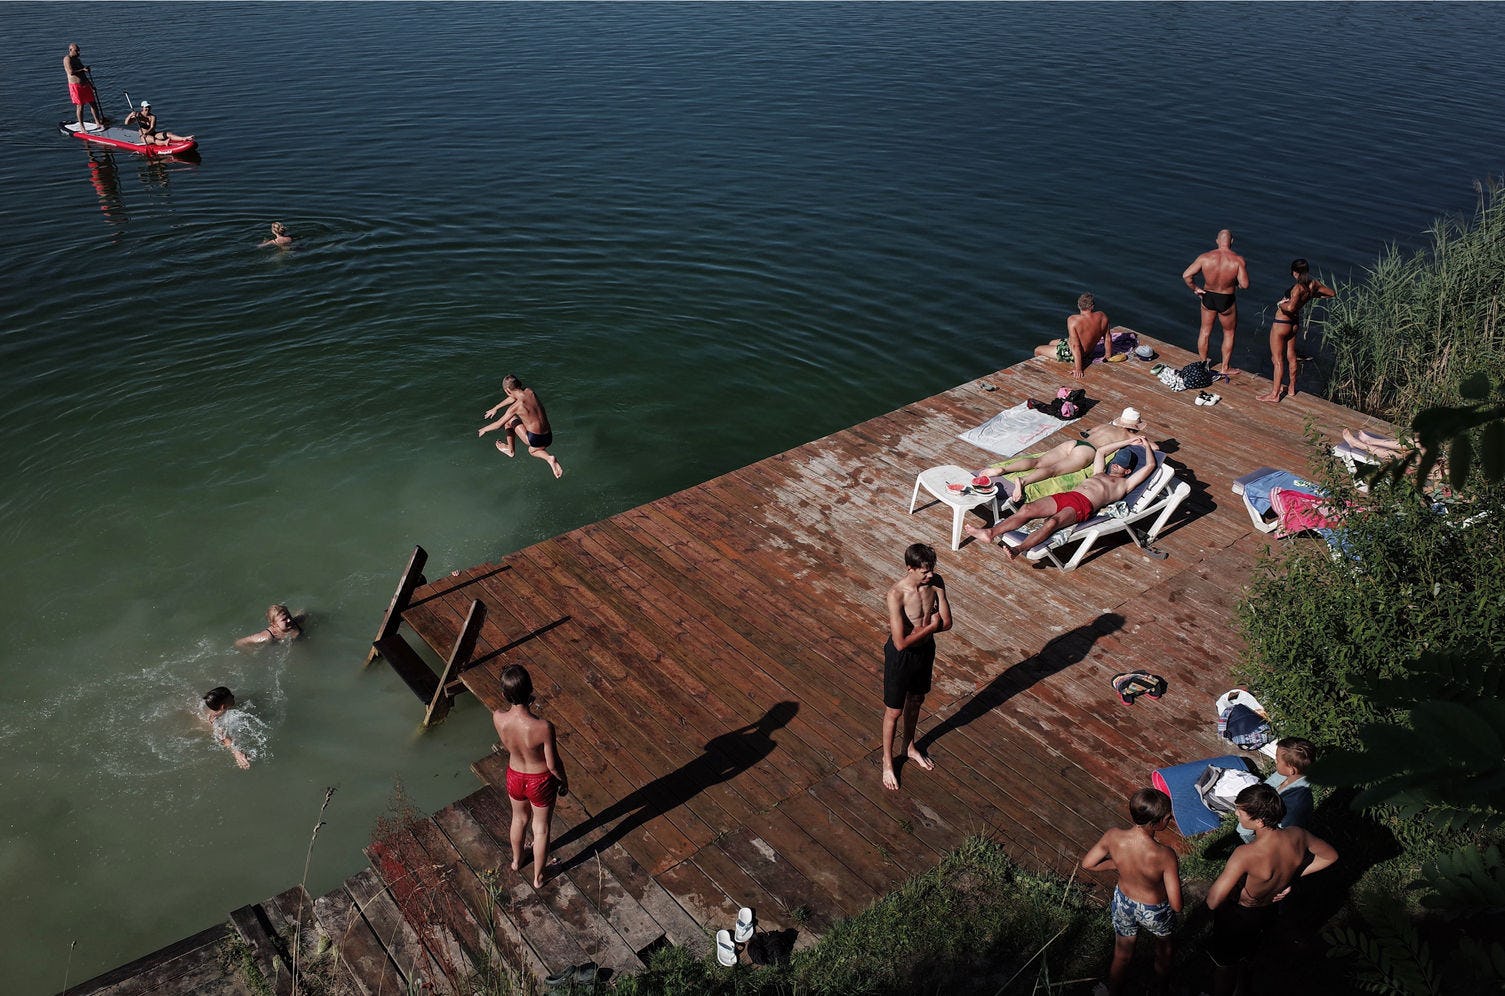 people swimming and tanning at wooden platform by a lake